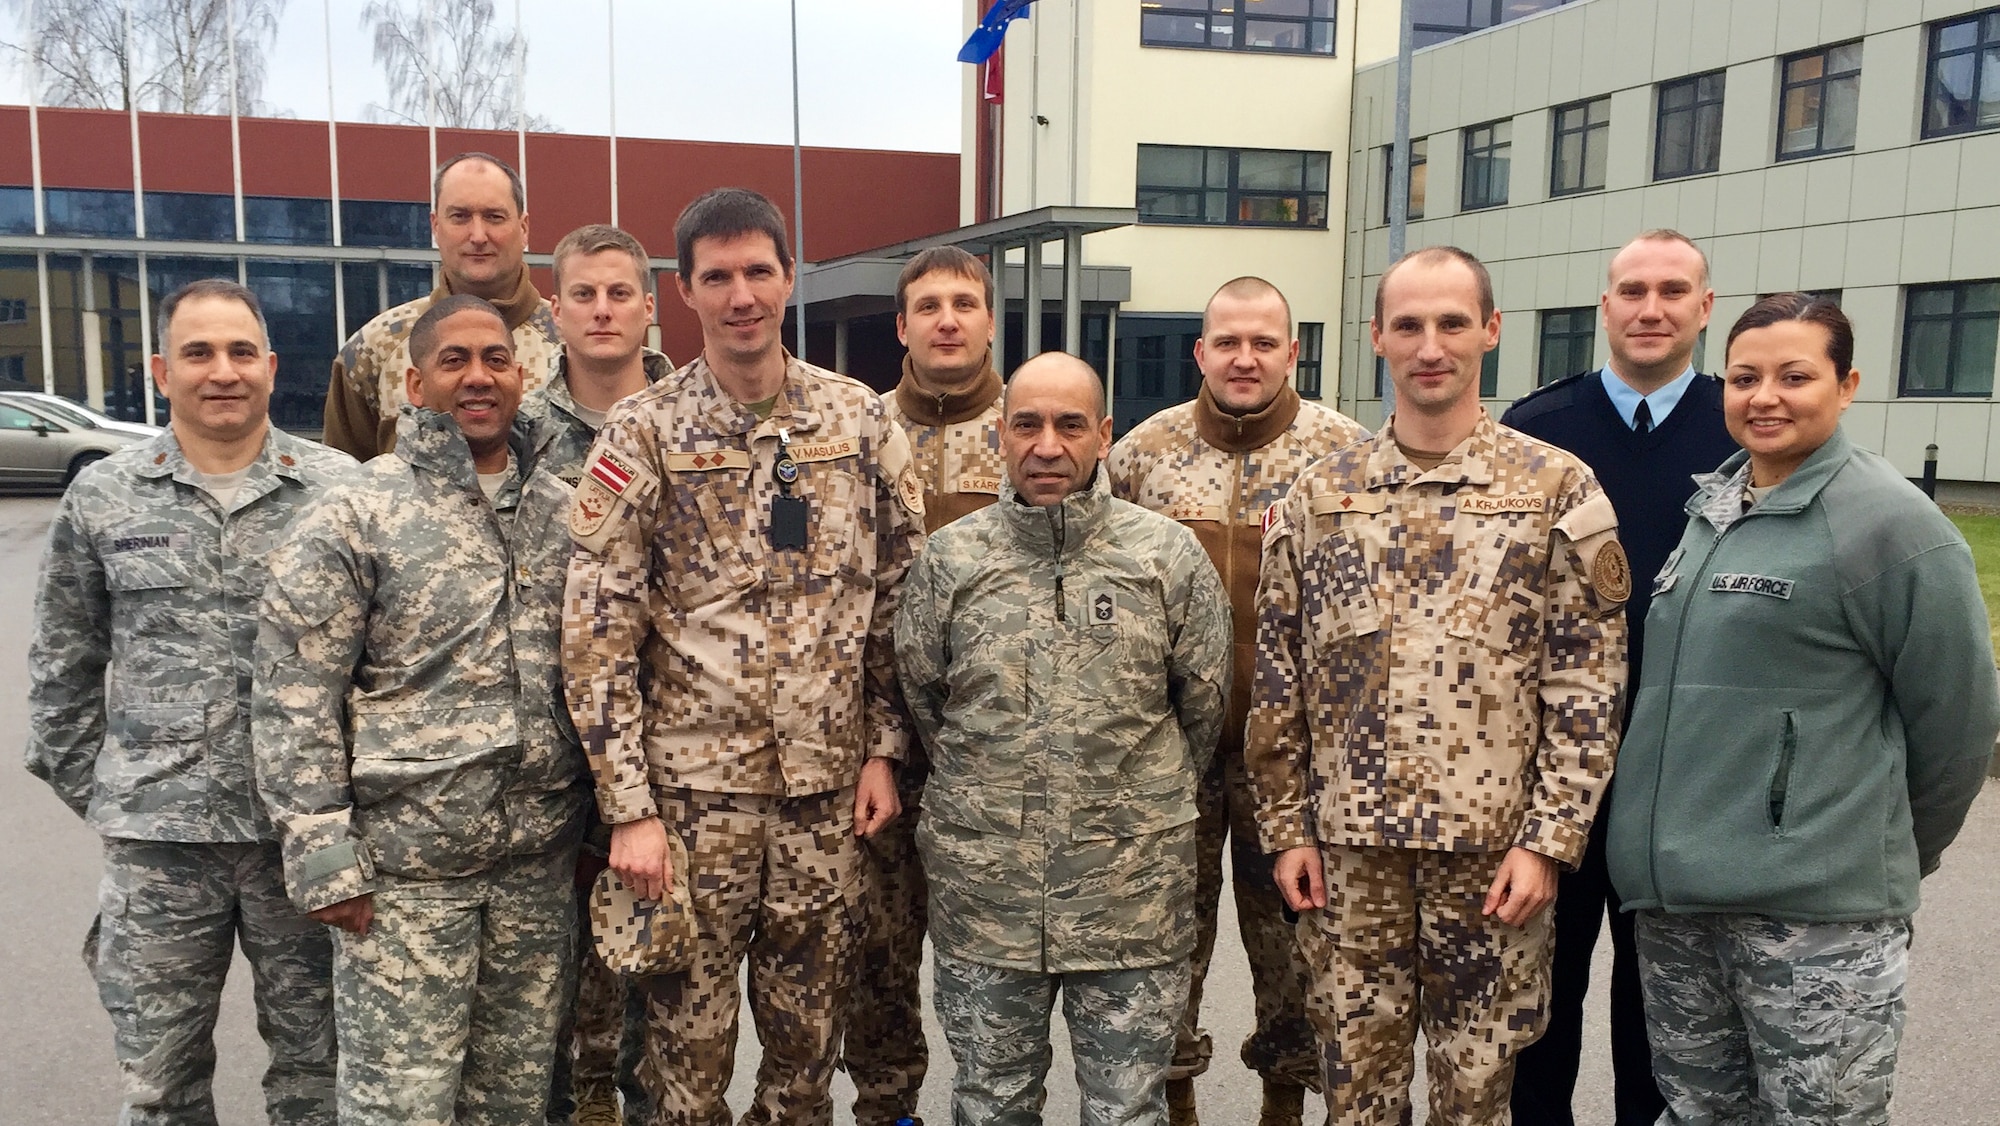 Air Advisors from the 435th Air Ground Operations Wings Contingency Response Group, Detachment-1 pose with Latvian Air Force airmen during a weeklong event to build partnerships Dec. 9, 2014, at Joint Forces Headquarters, Riga, Latvia. During a five-day trip, the air advisors formed a working group to develop the Latvian Air Force and help support Baltic policing efforts. (Courtesy Photo) 